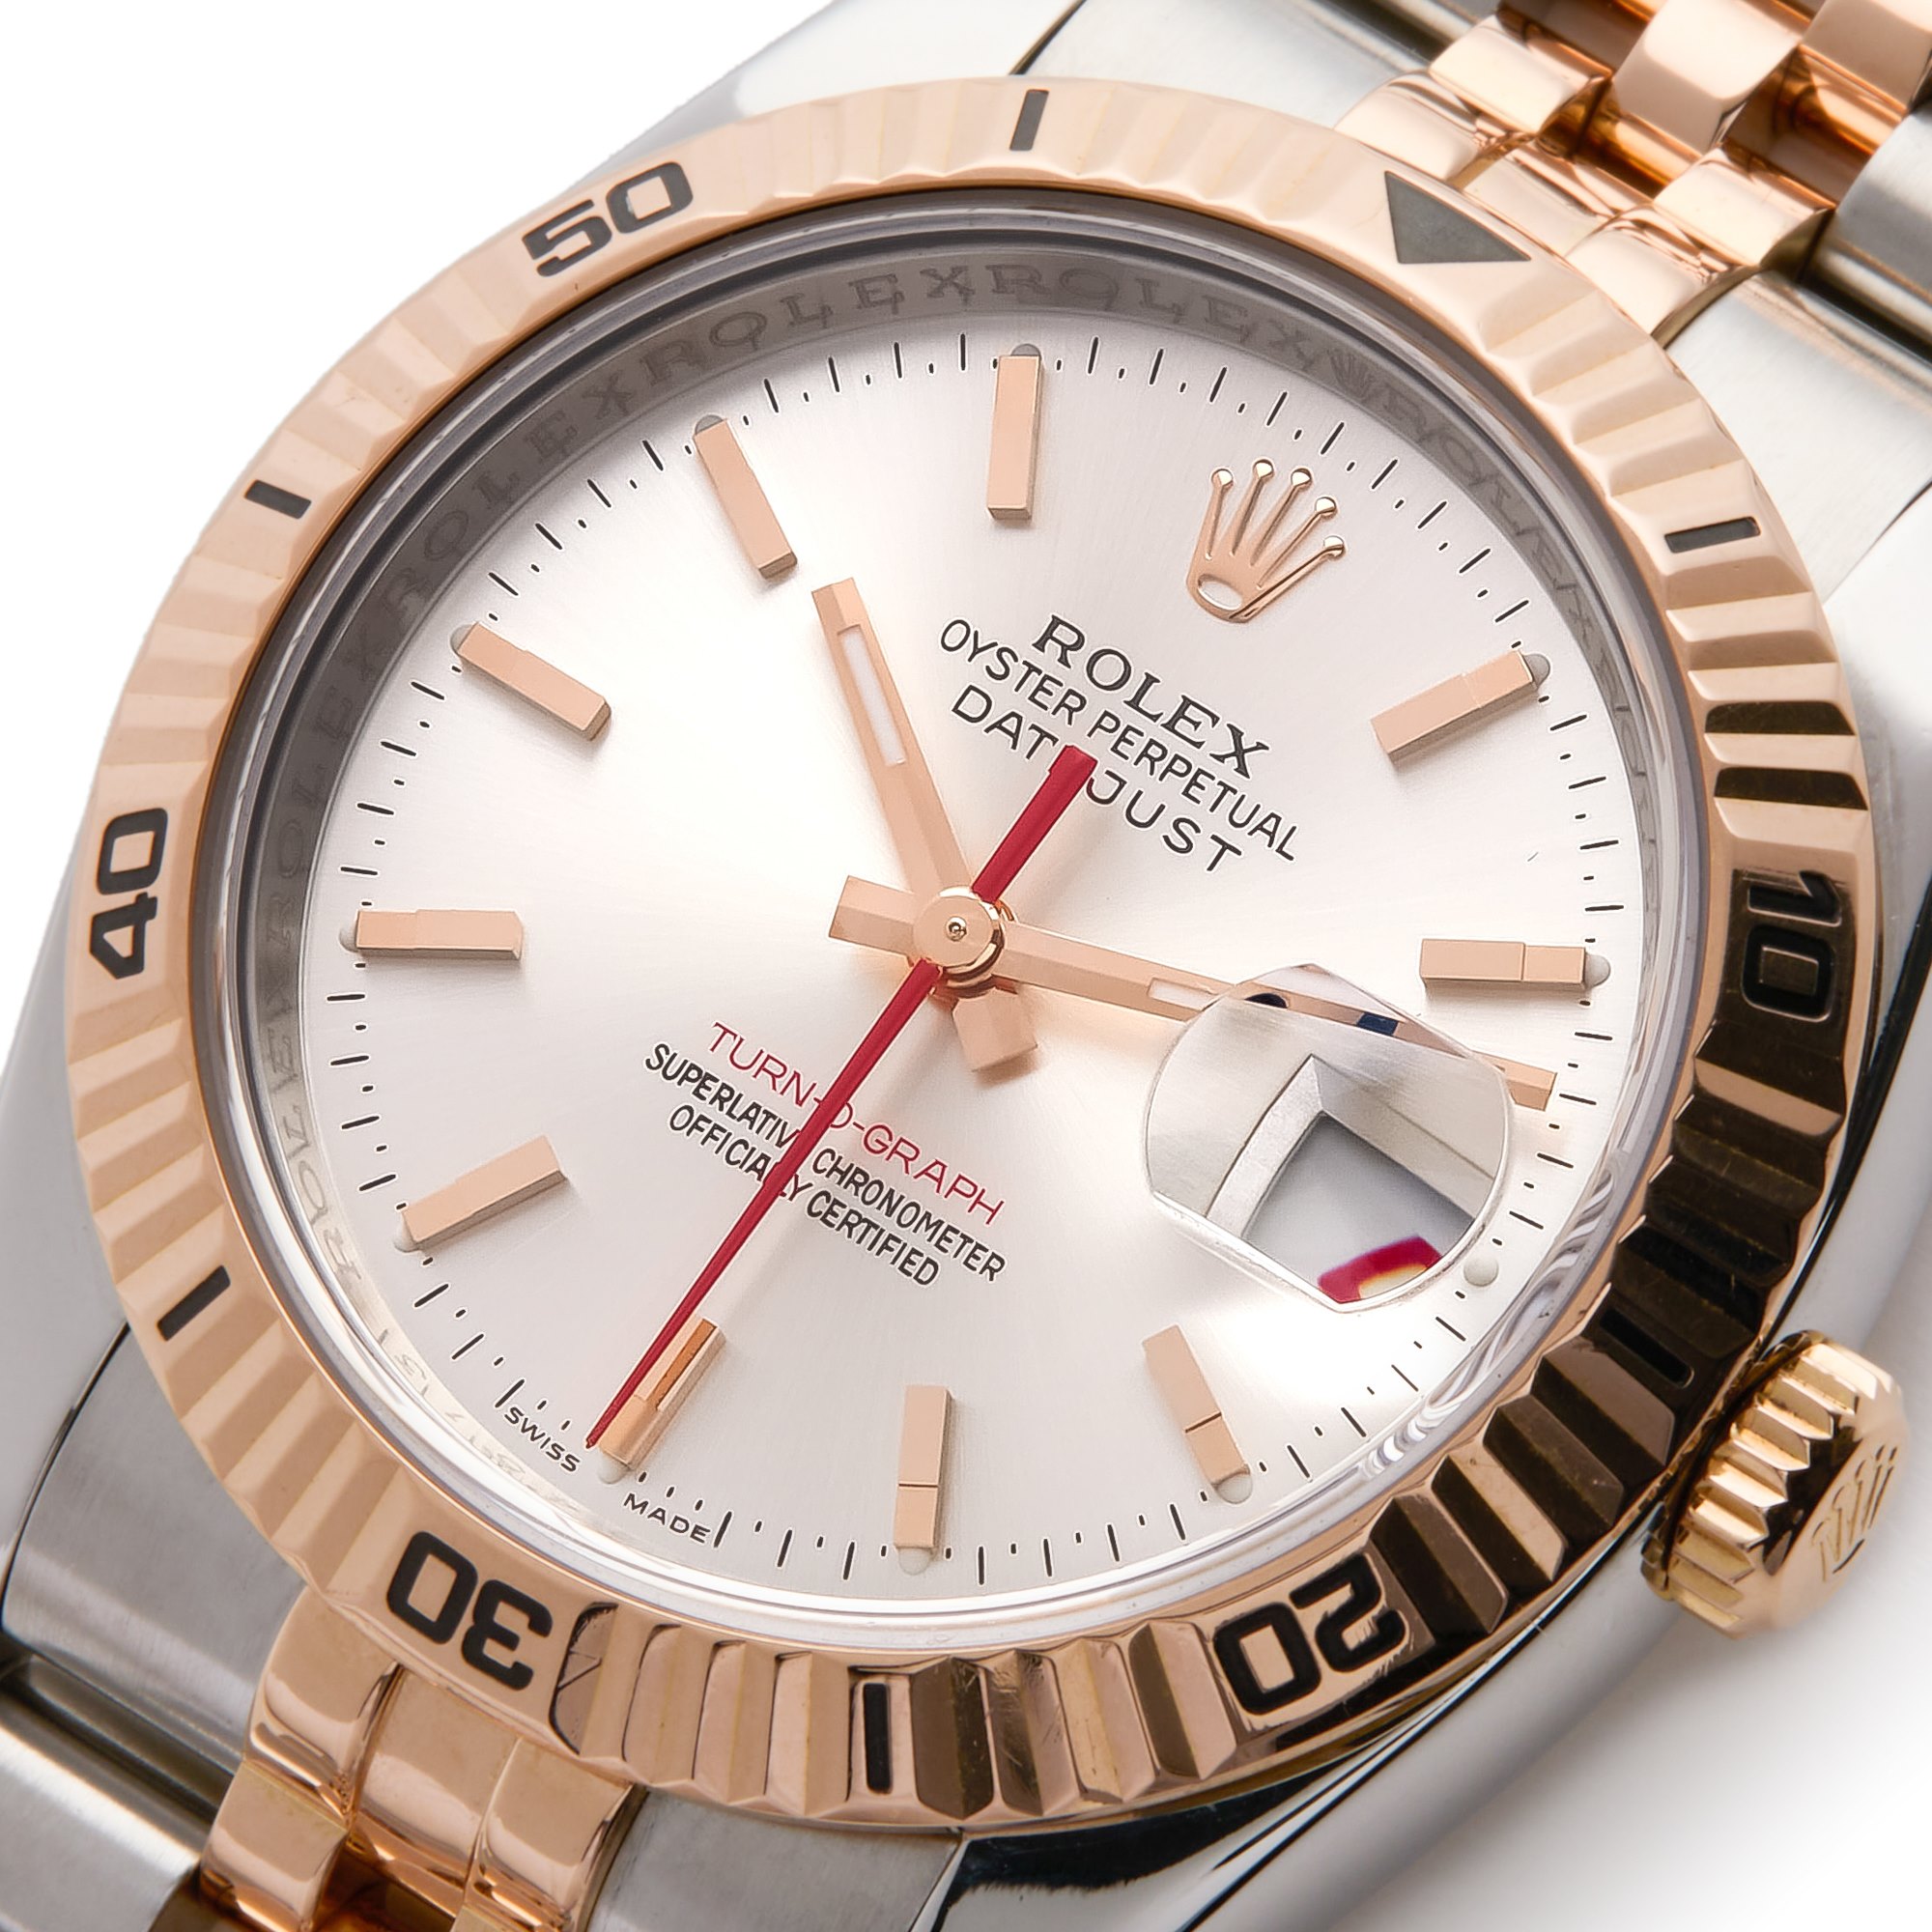 Rolex Datejust Turn-O-Graph Rose Gold & Stainless Steel 116261